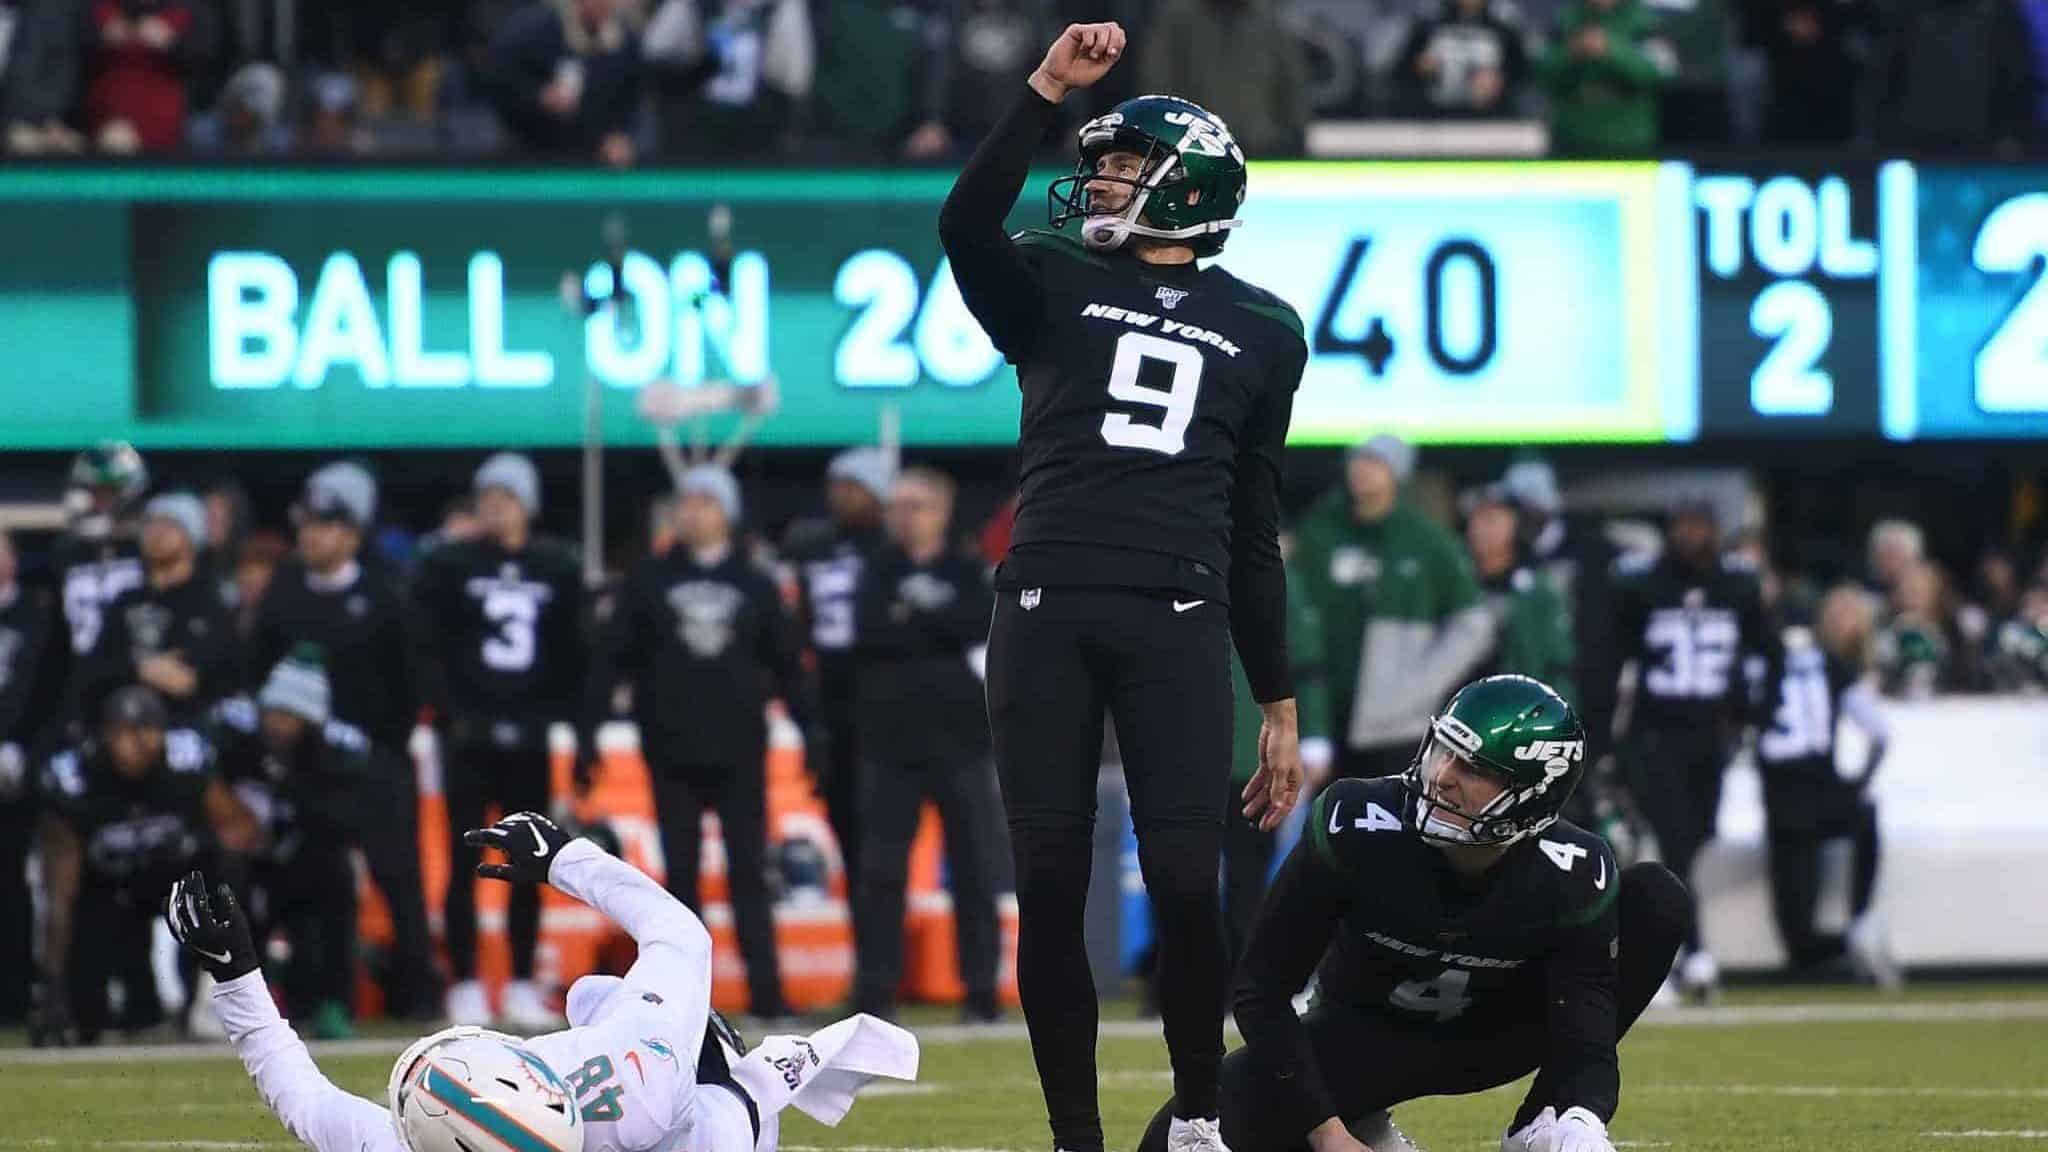 EAST RUTHERFORD, NEW JERSEY - DECEMBER 08: Sam Ficken #9 of the New York Jets kicks the game-winning field goal as Lac Edwards #4 placeholds during the second half of the game against the Miami Dolphins at MetLife Stadium on December 08, 2019 in East Rutherford, New Jersey. The New York Jets defeat the Miami Dolphins 22-21.